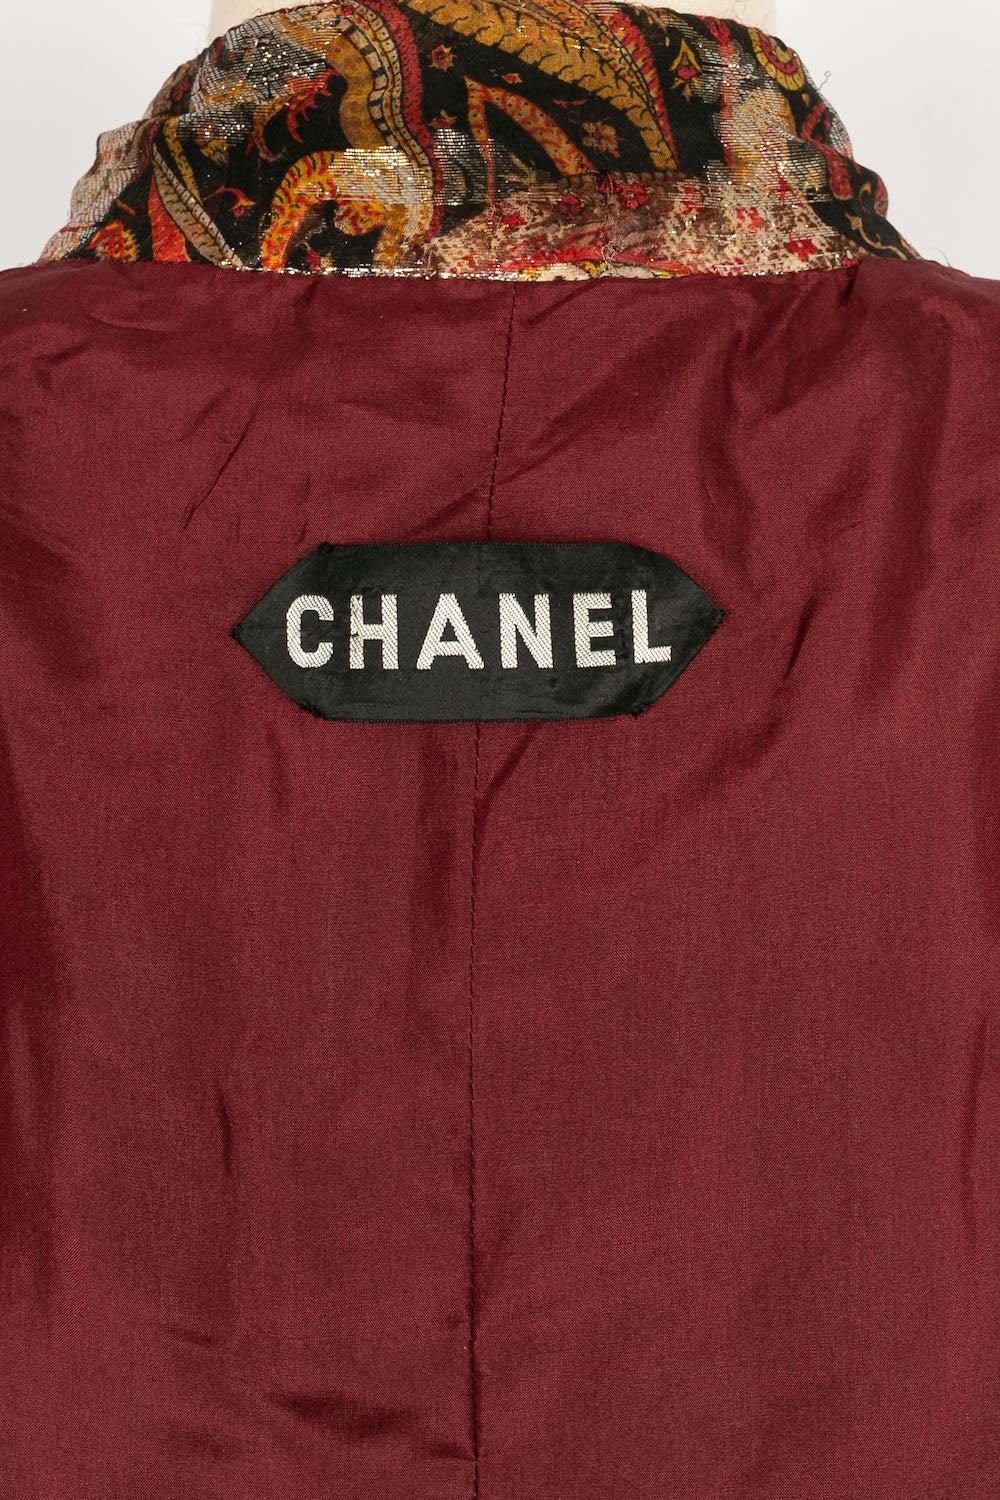 Chanel Haute Couture Wool and Silk Suit For Sale 9